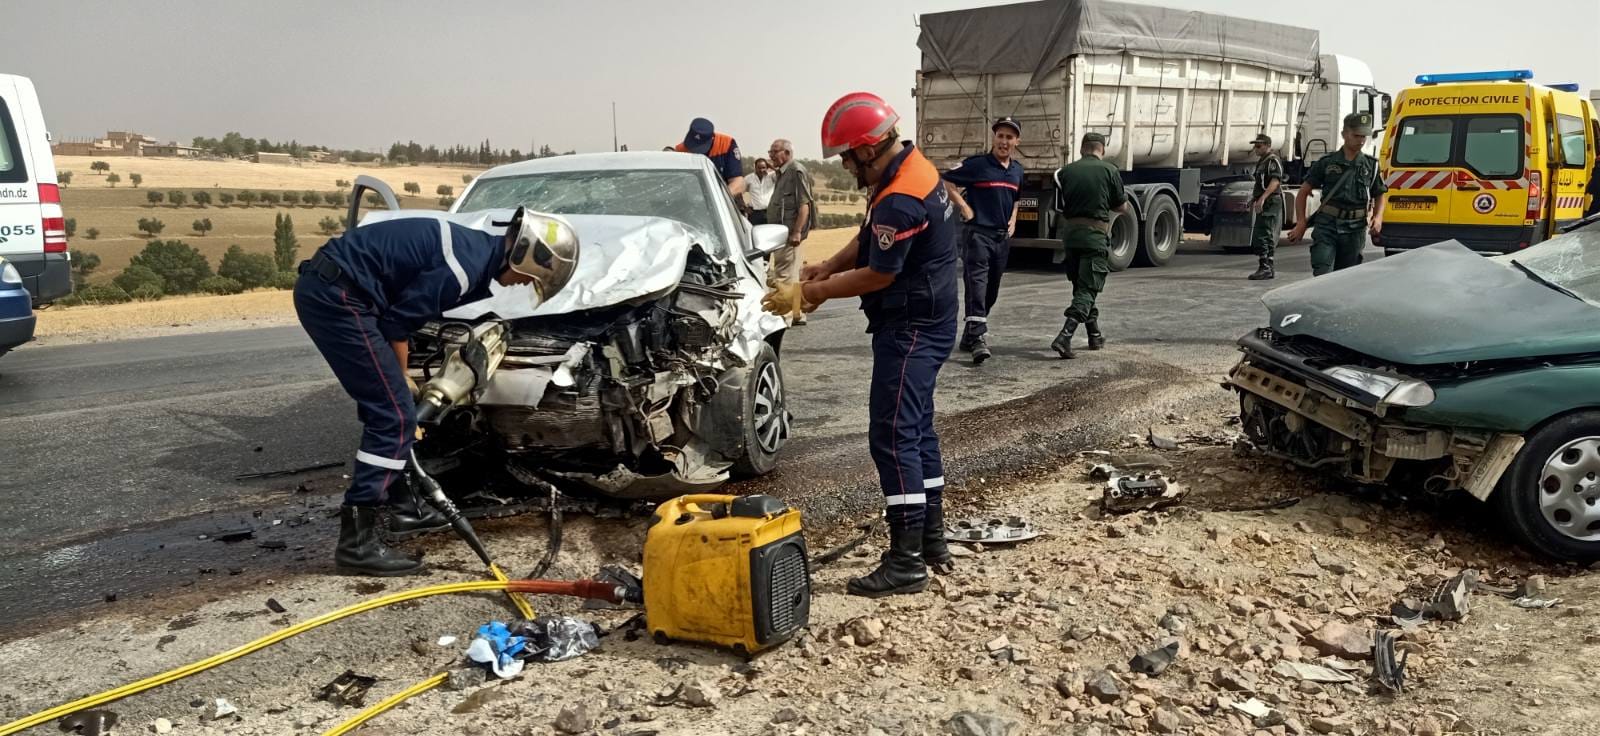 Civil Protection: 51 people died and 1,650 others were injured as a result of traffic accidents - Algerian Dialogue